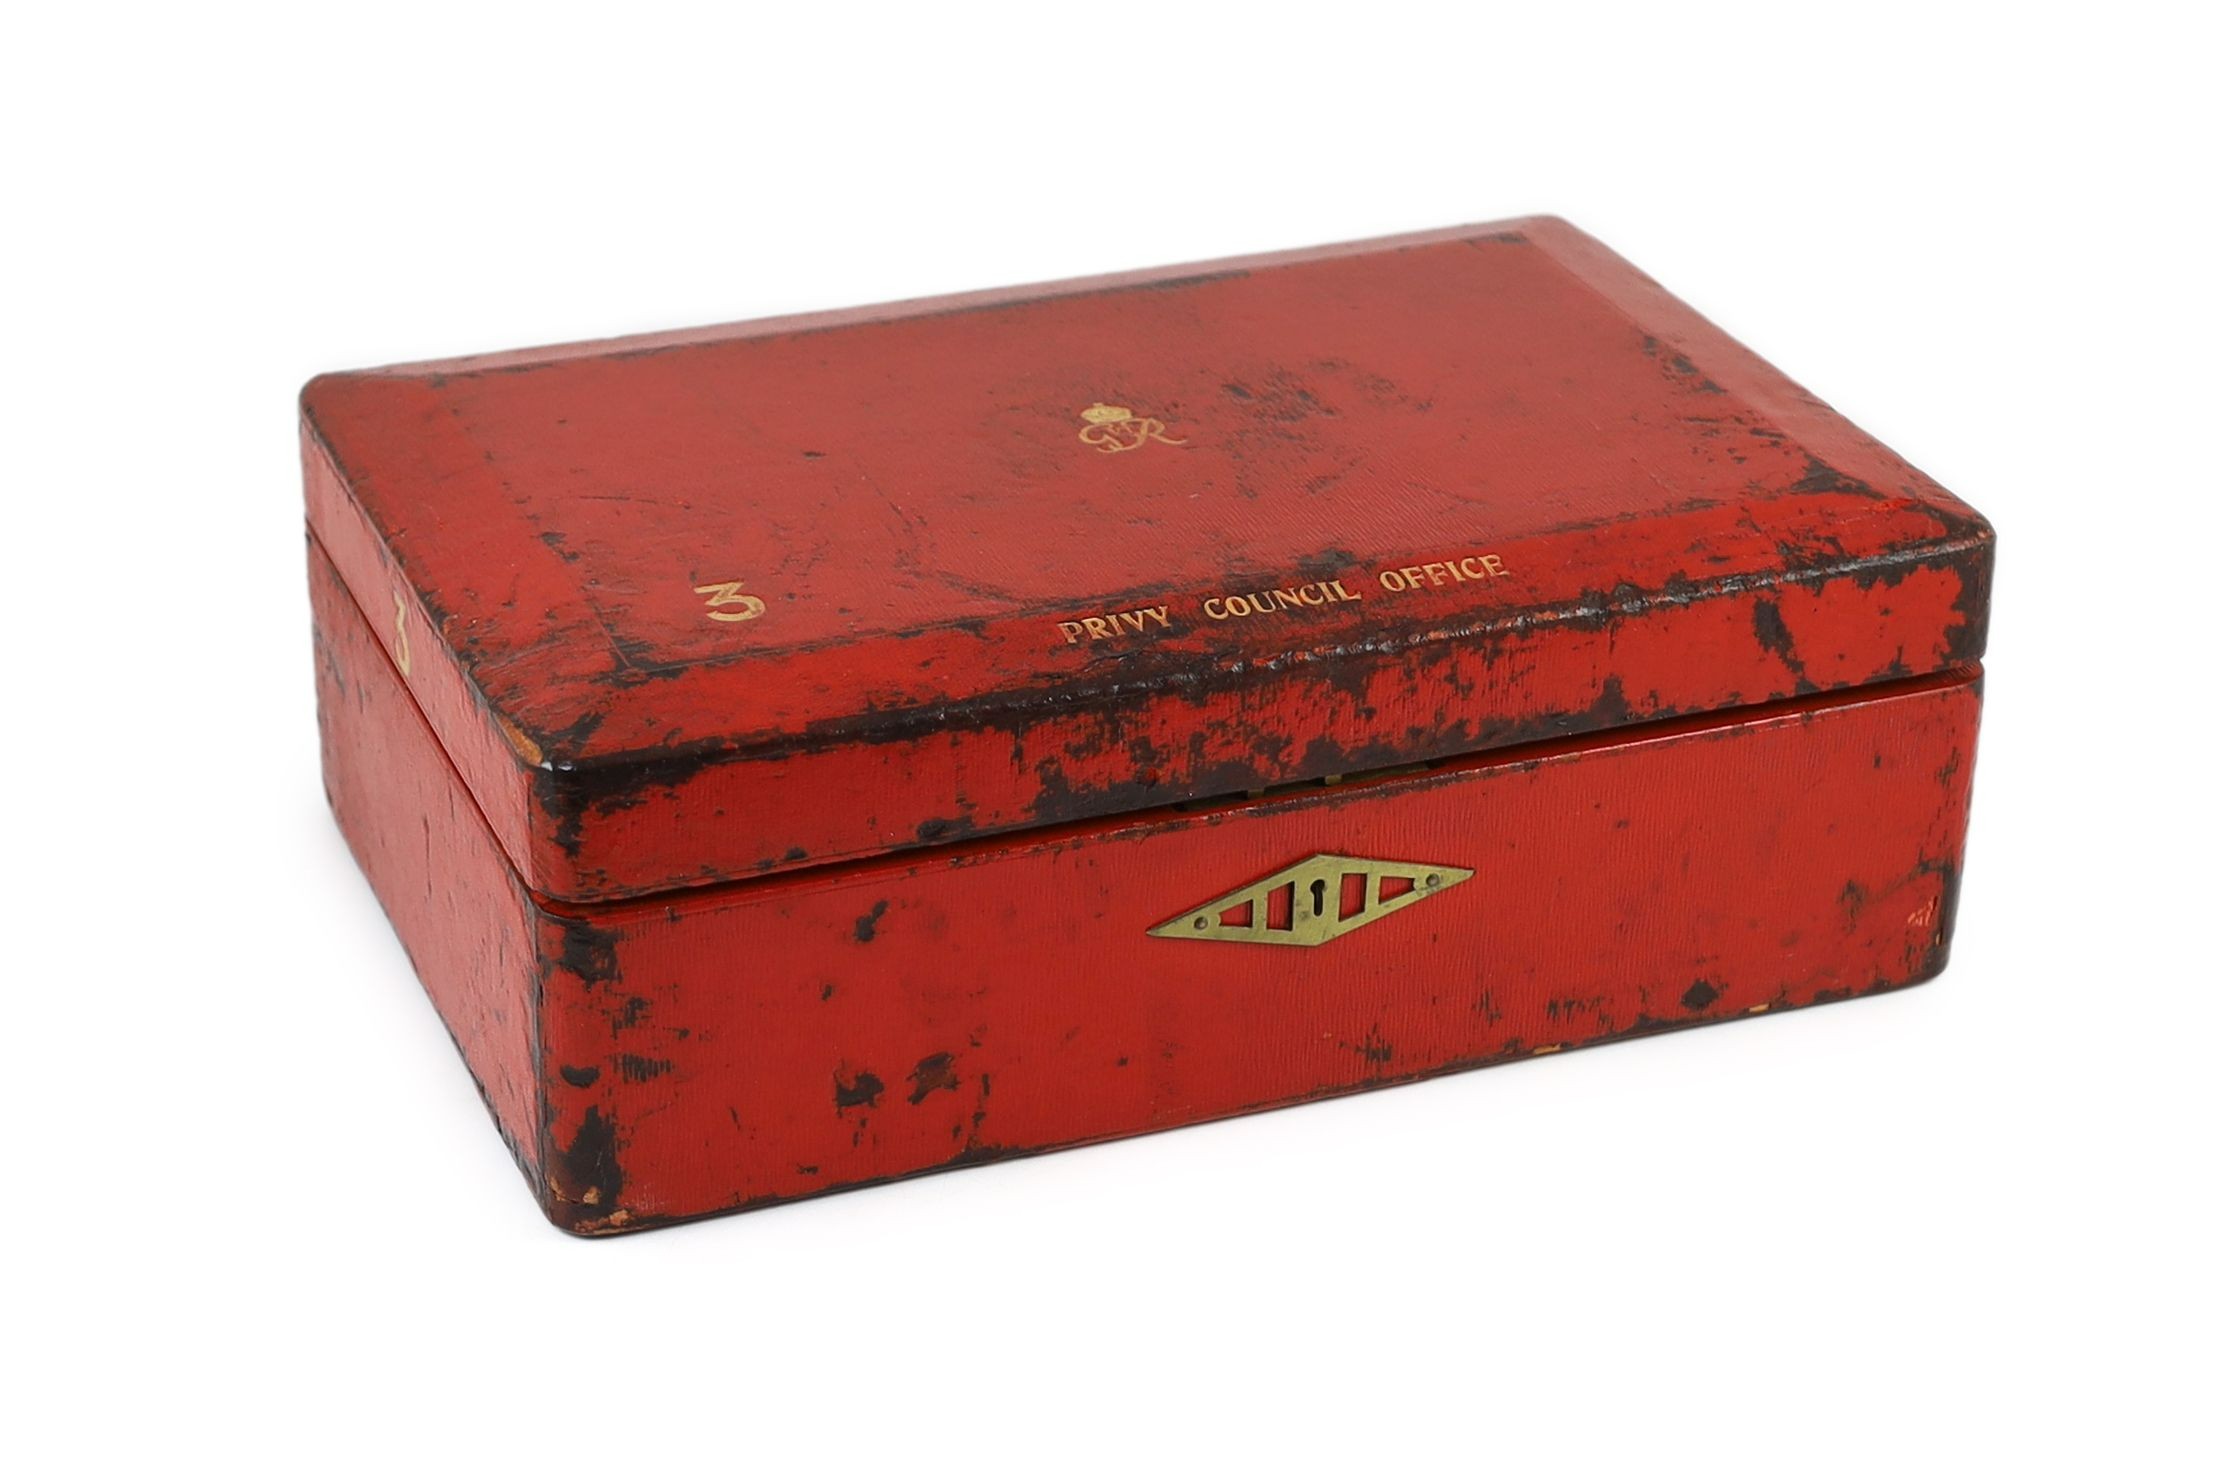 A George VI red morocco leather government despatch box, 46cm wide 31cm deep 15cm high